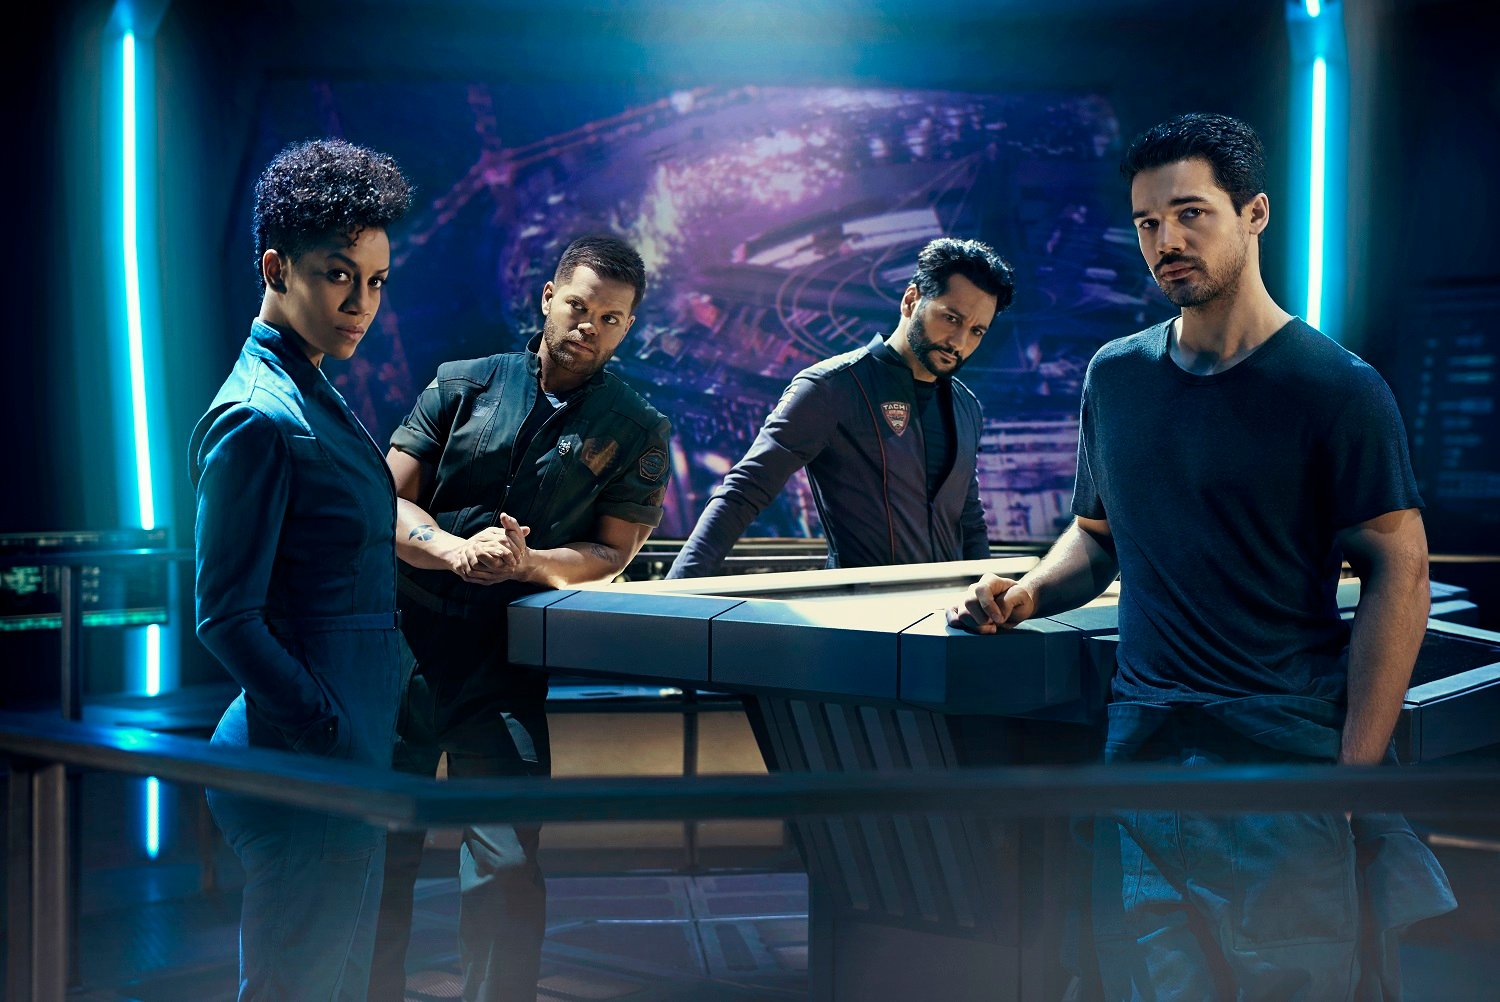 Dominique Tipper as Naomi Nagata, Wes Chatham as Amos Burton, Cas Anvar as Alex Kamal, and Steven Strait as James Holden on The Expanse